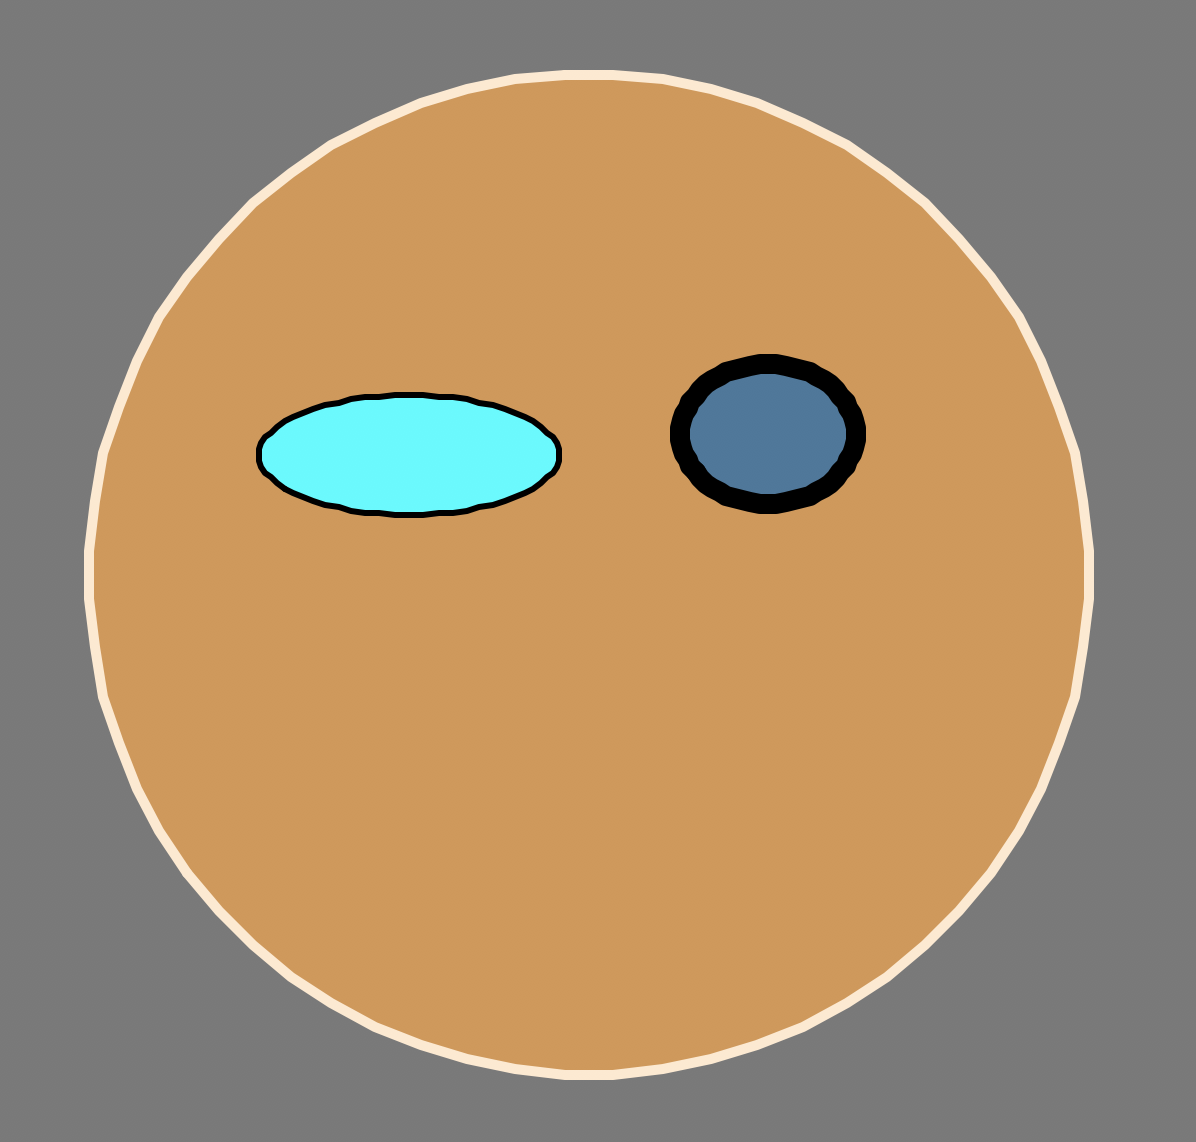 Face with eyes added: two blue ellipes are now present in the top half of the brown circle, with different shades of blue and different thicknesses for their black borders.